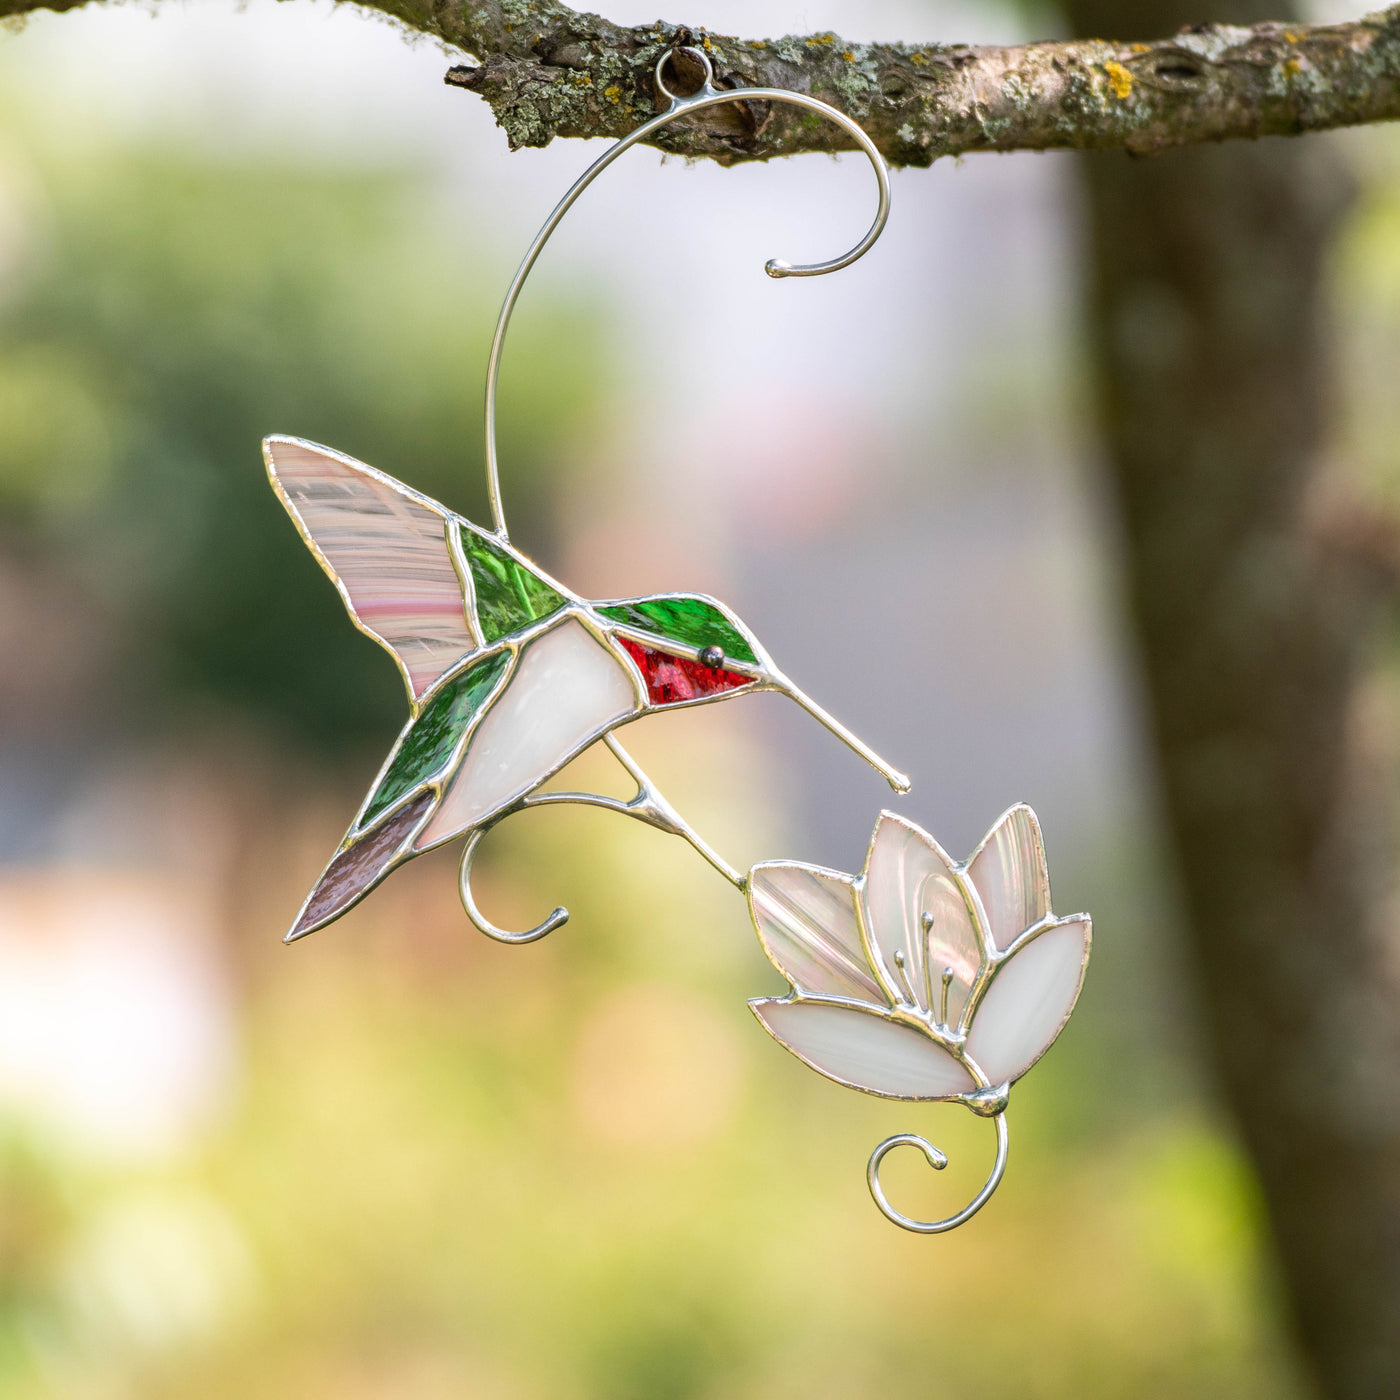 Ruby-throated stained glass hummingbird with the flower suncatcher of stained glass